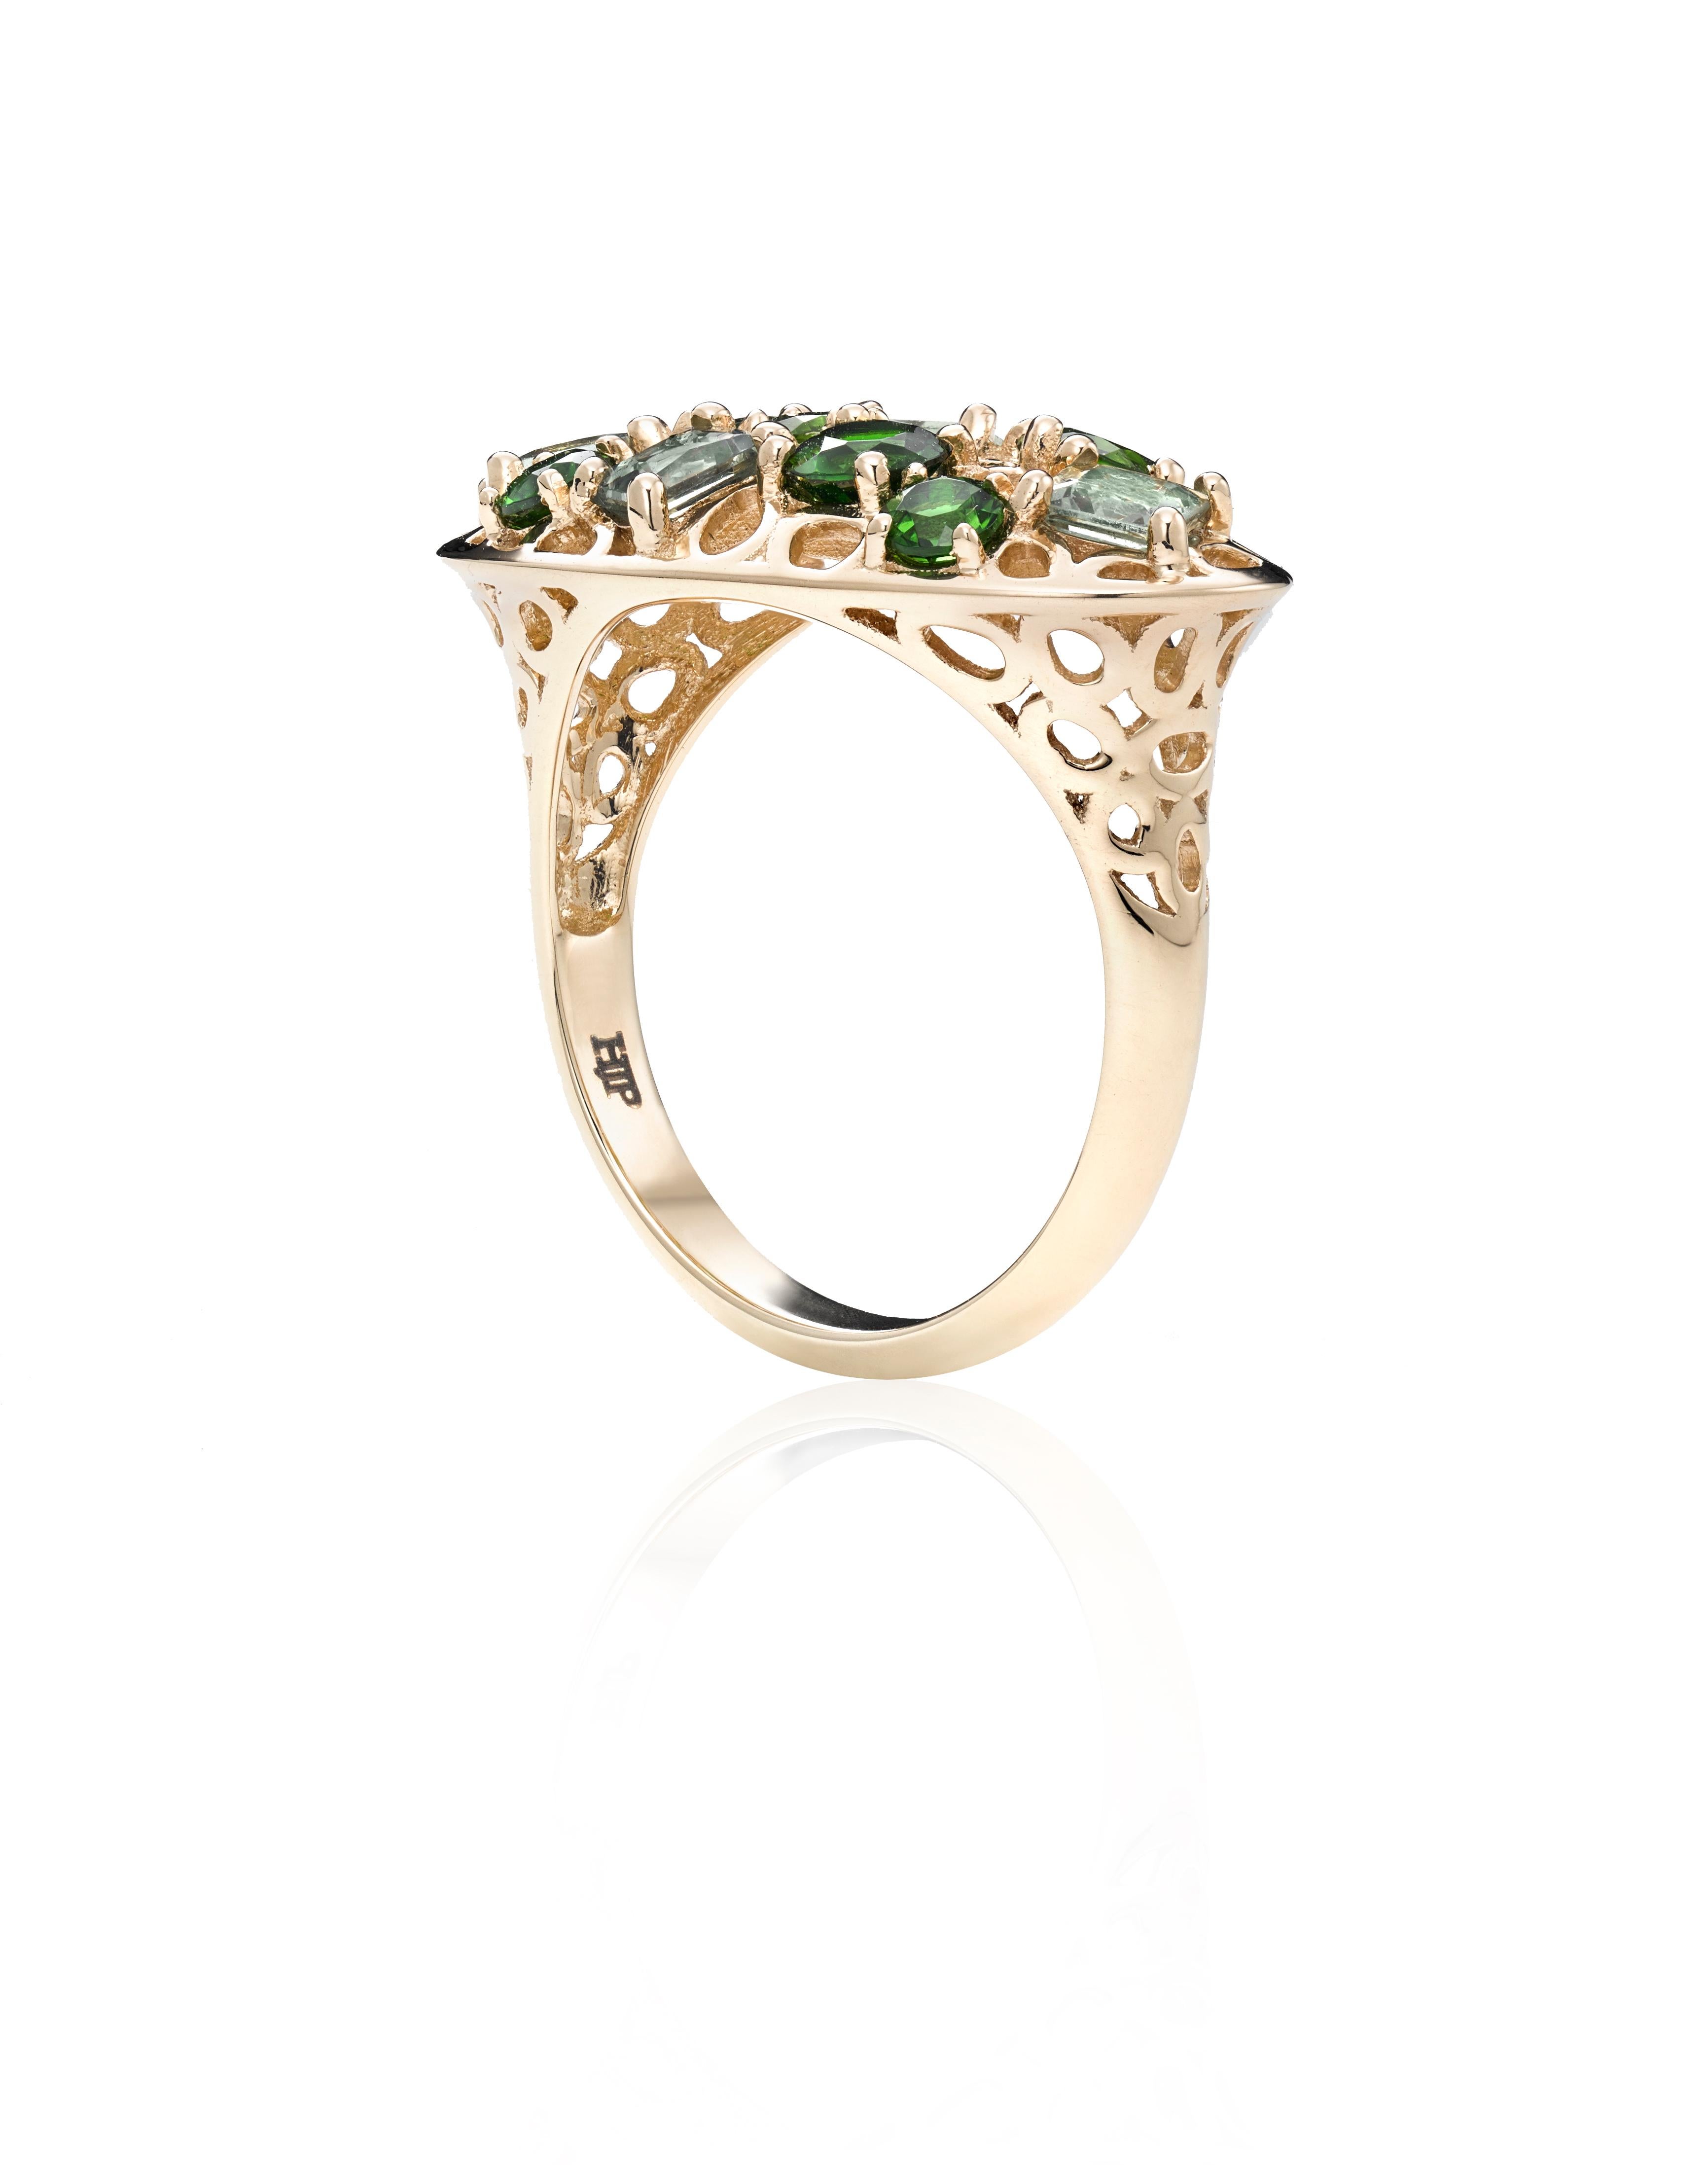 Prong set Green Sapphires, Tsavirutes and Chrome Diopside stones scattered within Hi June Parker's signature intricate open work of organic circular motifs are captured in this Statement ring created to be worn with a cocktail dress, strong suit or